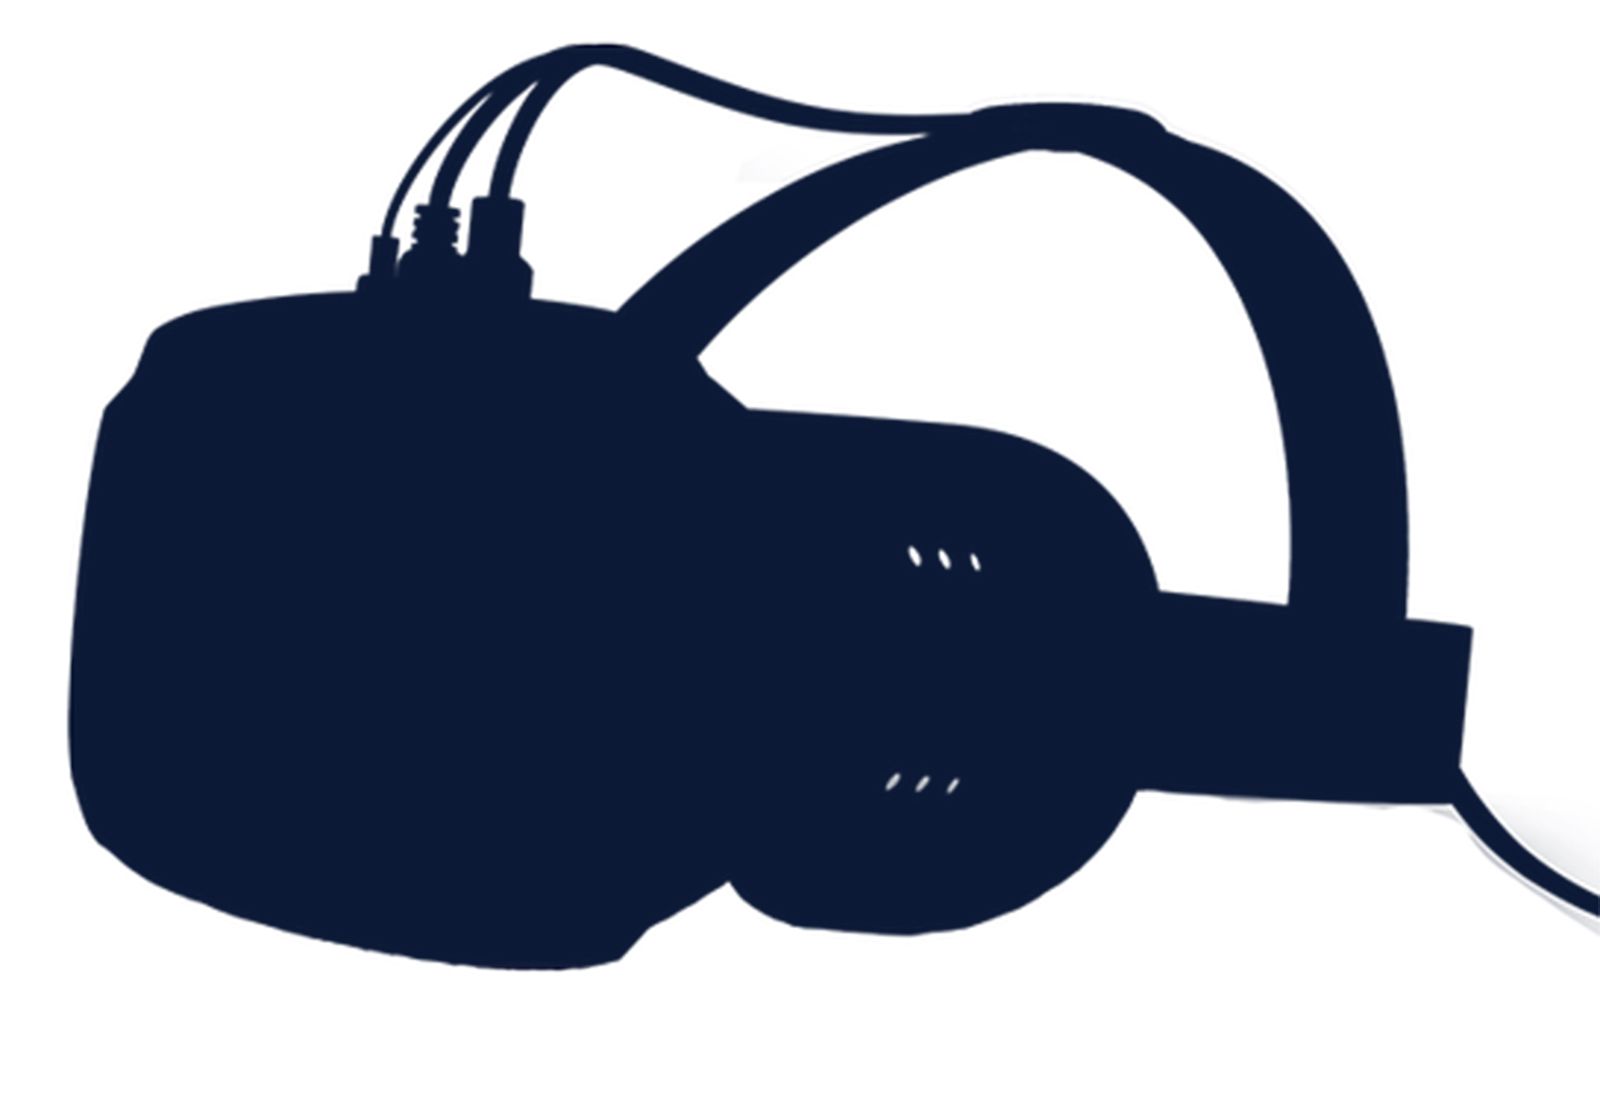 steamvr headset teased by valve looking rather oculus rift like image 1